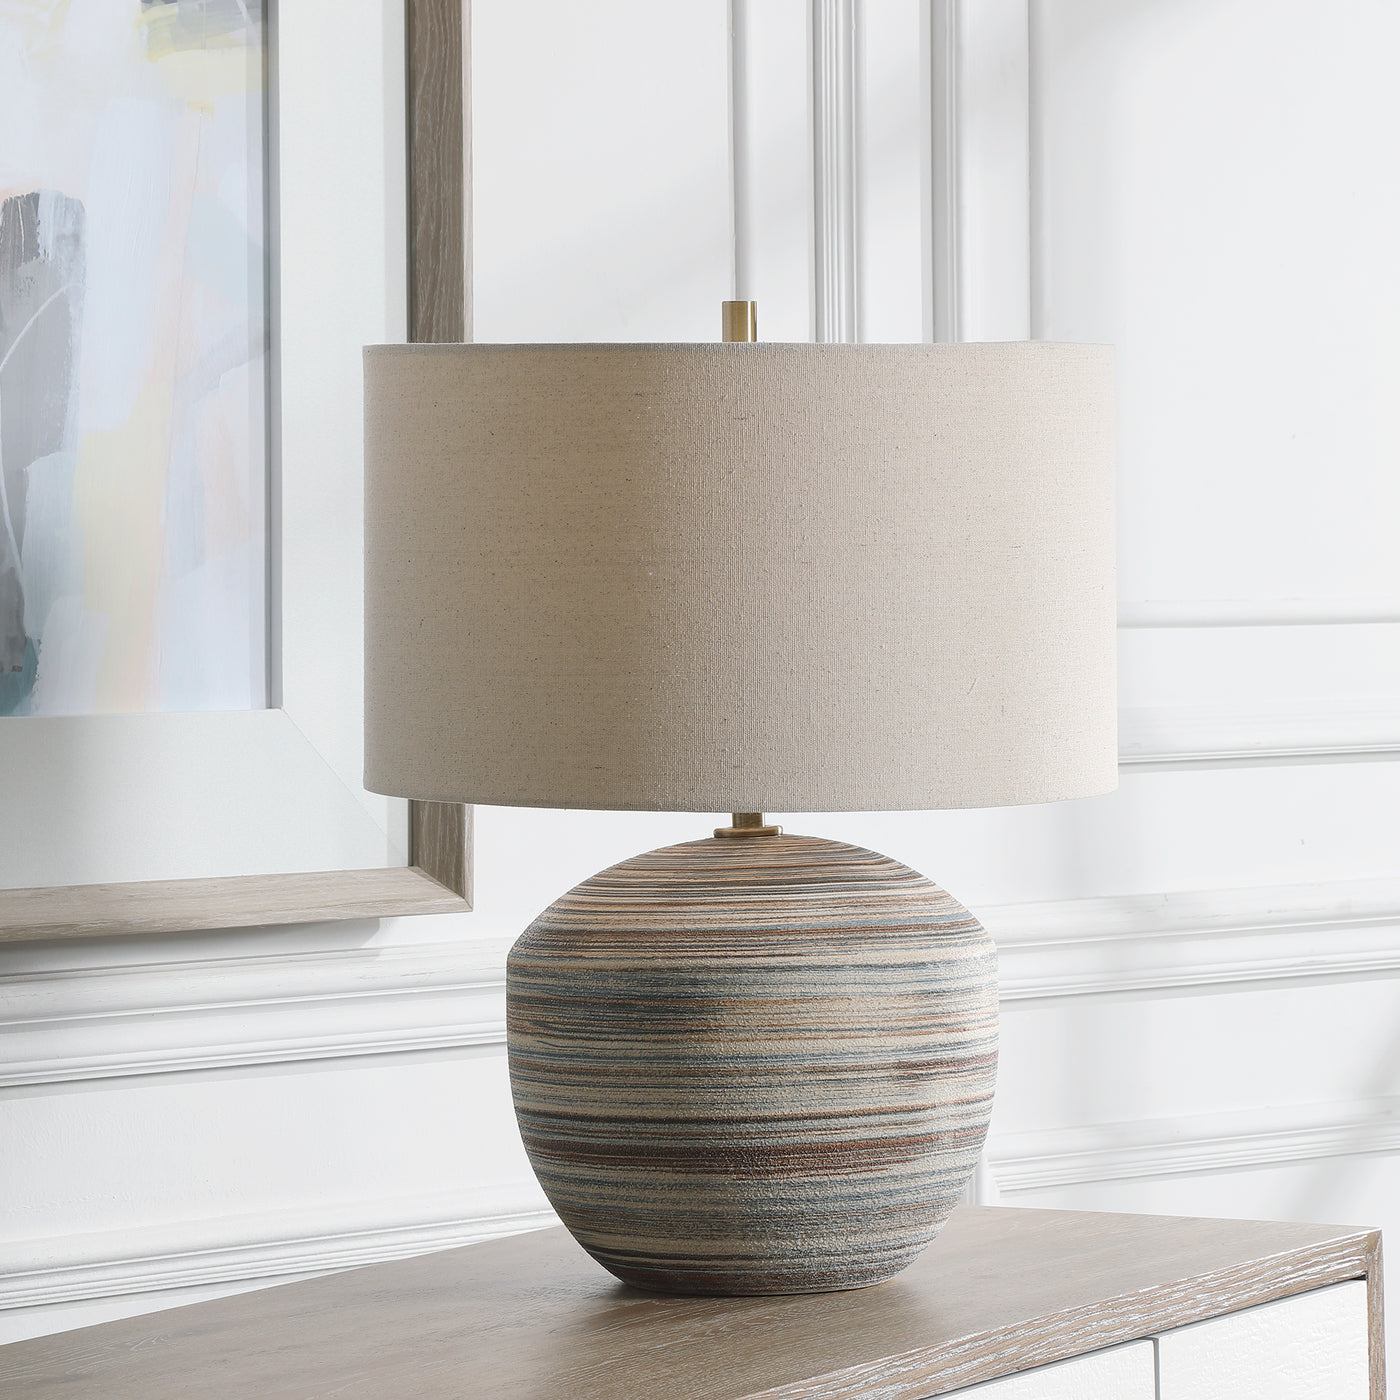 This Ceramic Accent Lamp Features A Striped Motif In Neutral Shades Of Brown, Taupe, Cream And Blue Accented By Light Brus...